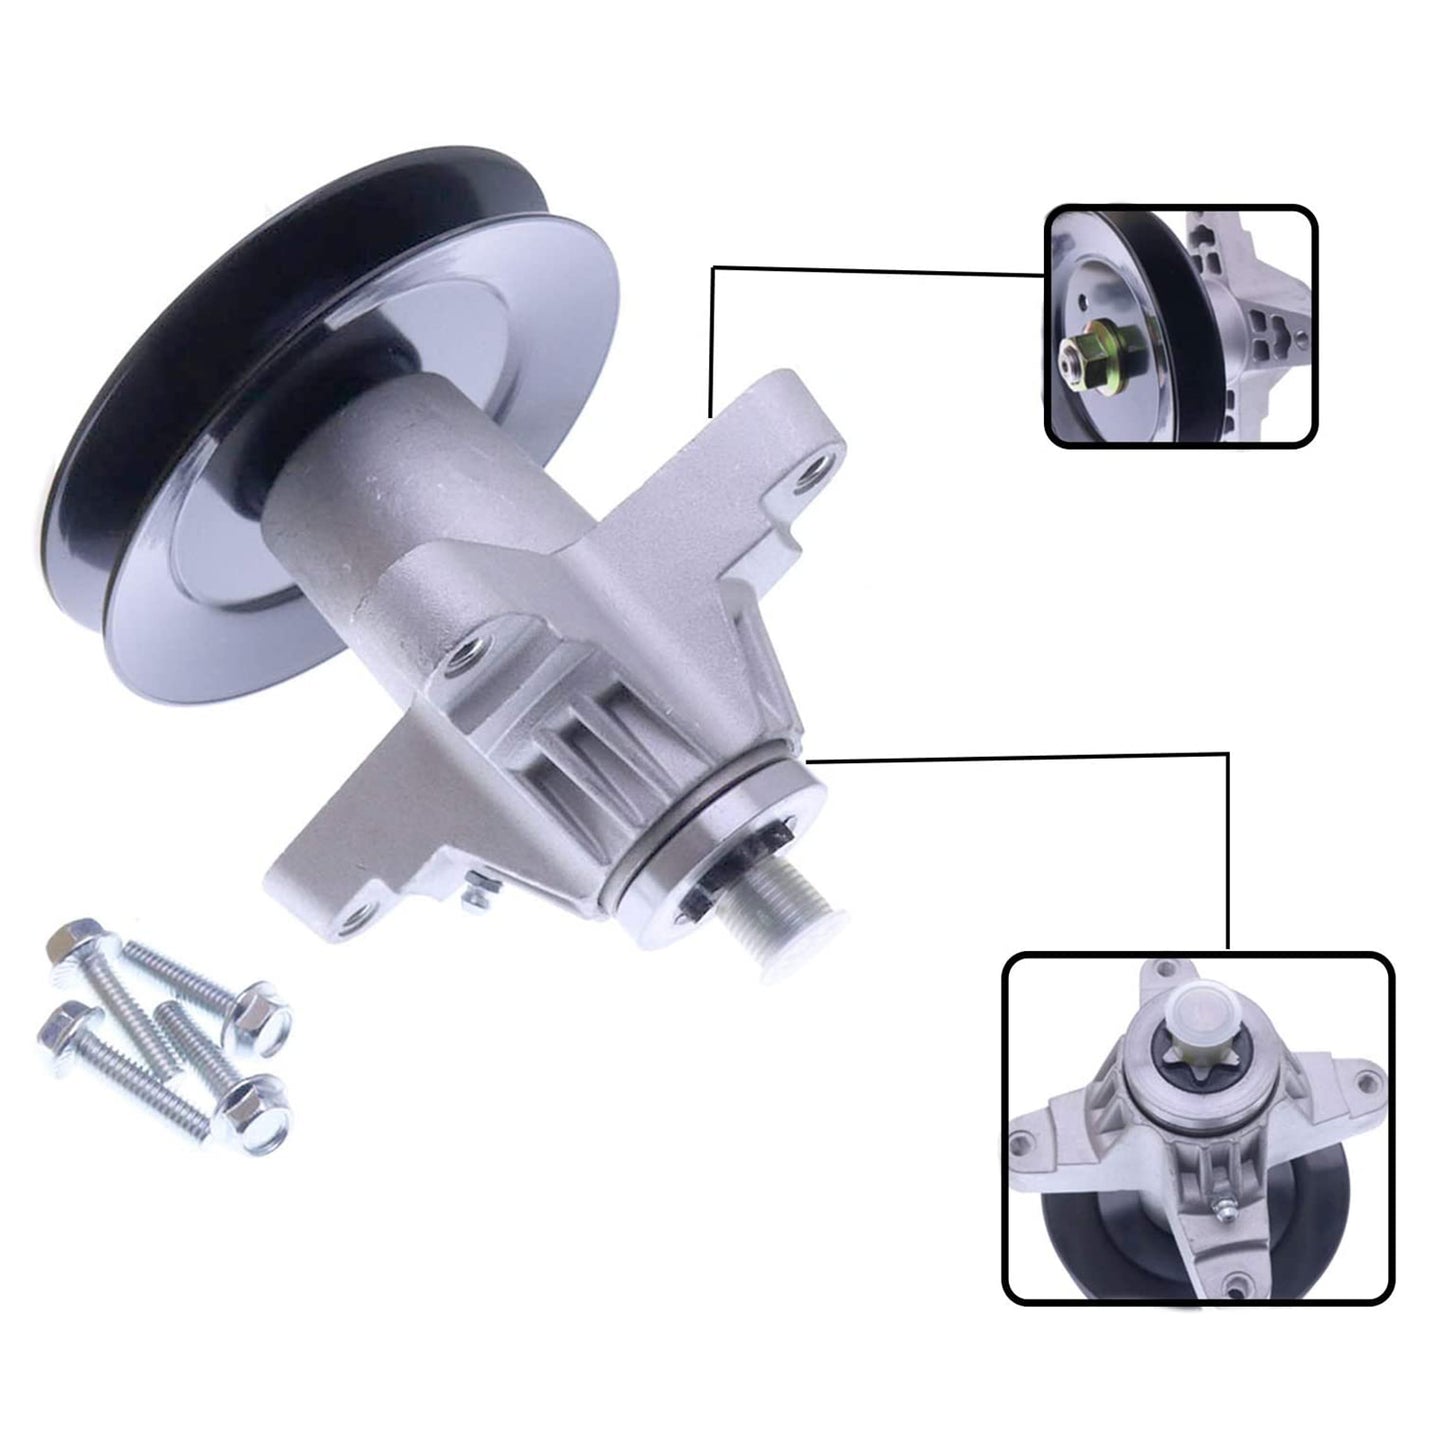 Spindle Assembly Compatible With MTD 618-04125 618-04126 18-04126A 918-04125A 918-04125B 918-04126 918-04126A461 618-04456 618-04456A